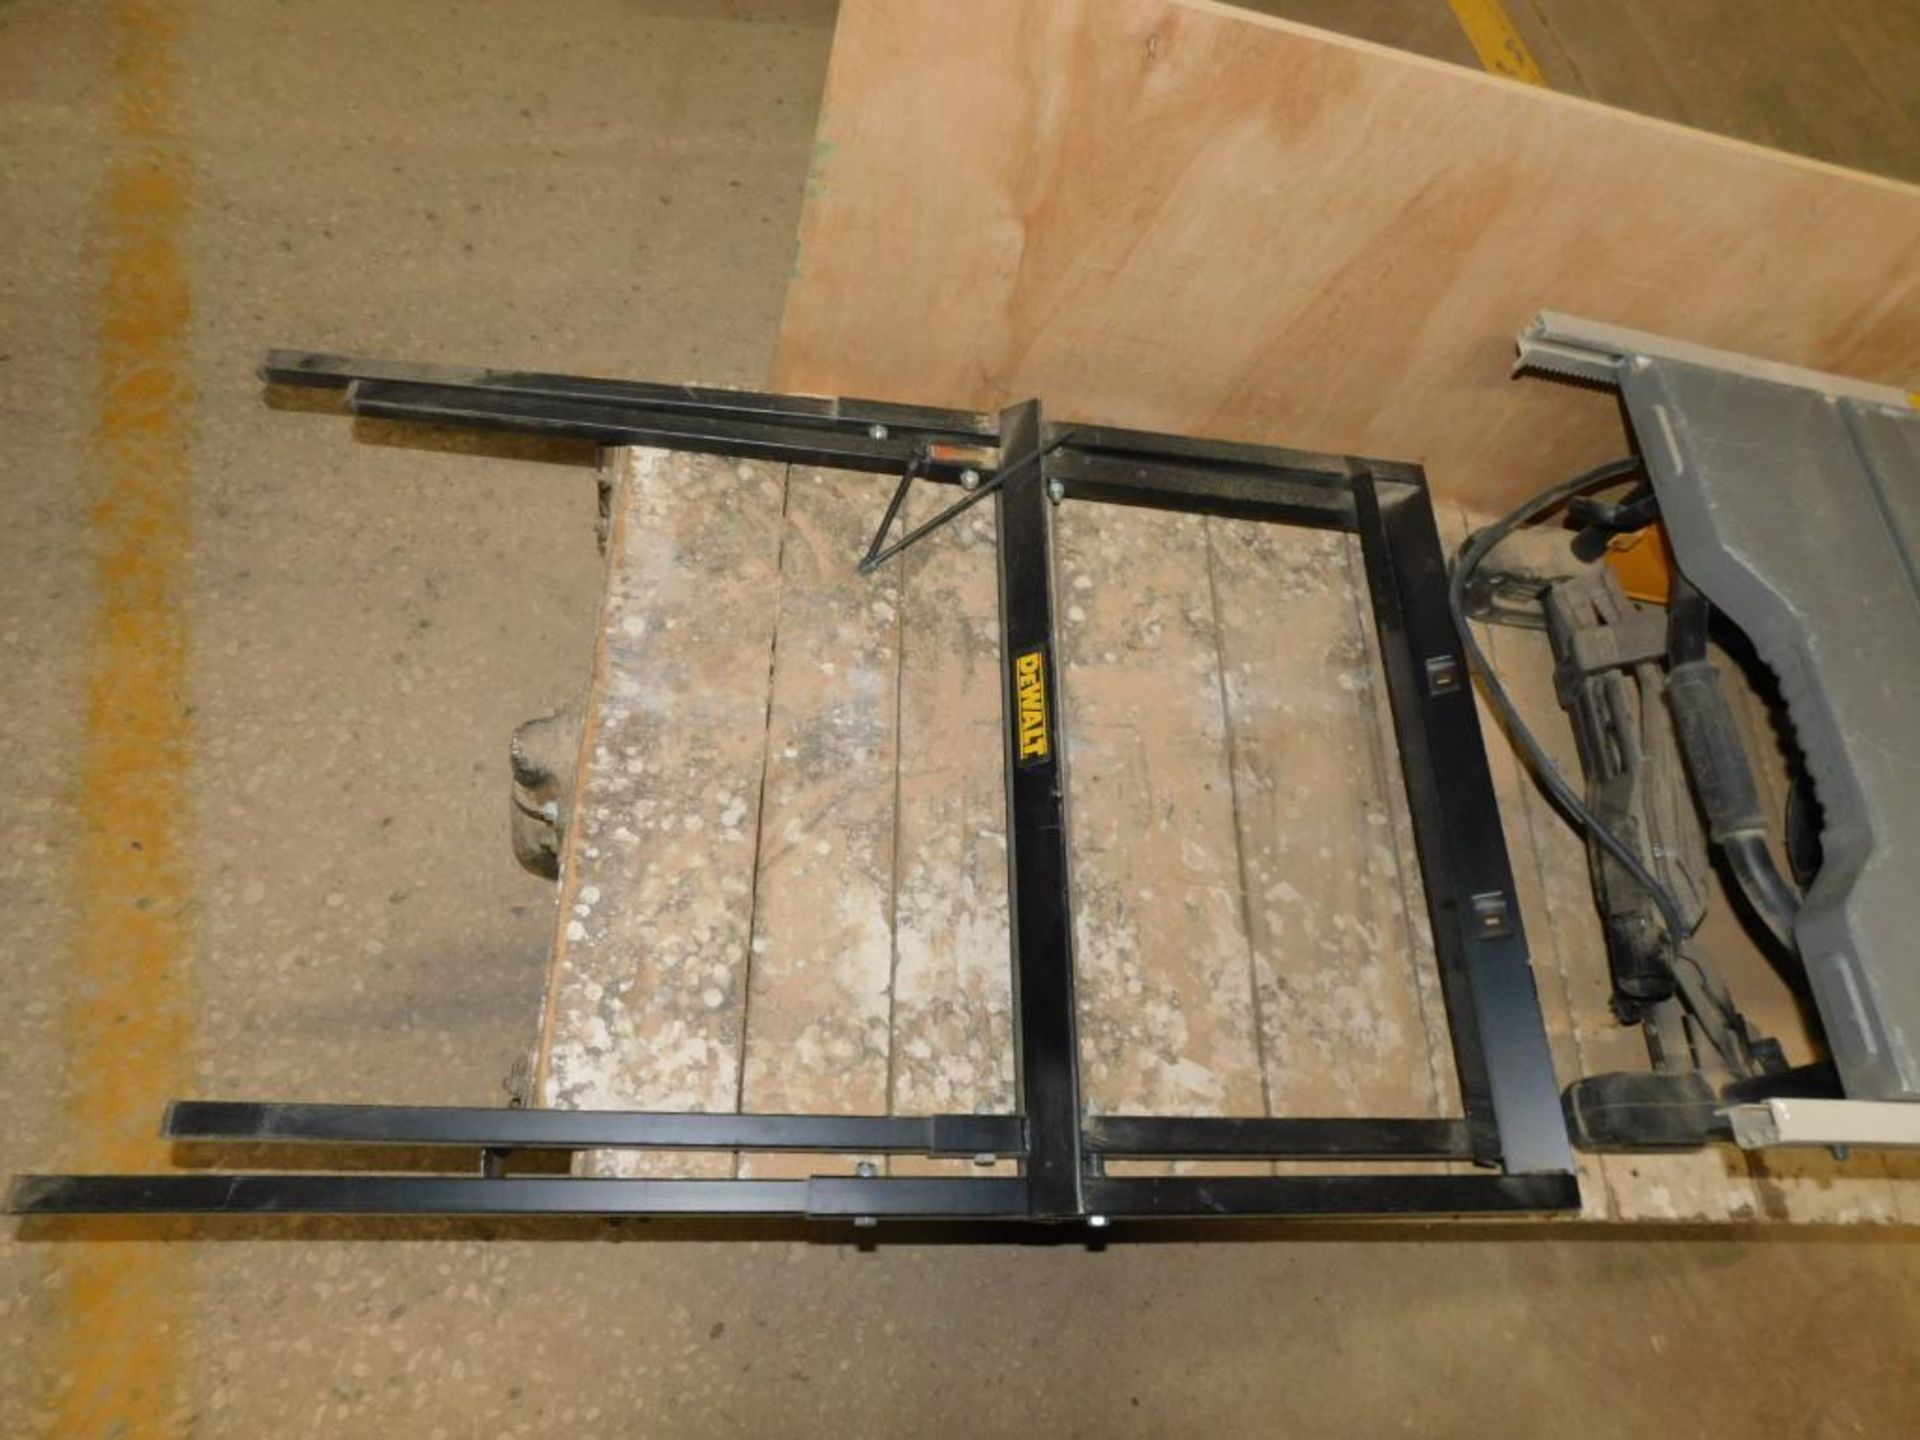 Dewalt Portable 10" Table Saw w/Stand & Rolling Shop Cart - Image 5 of 5